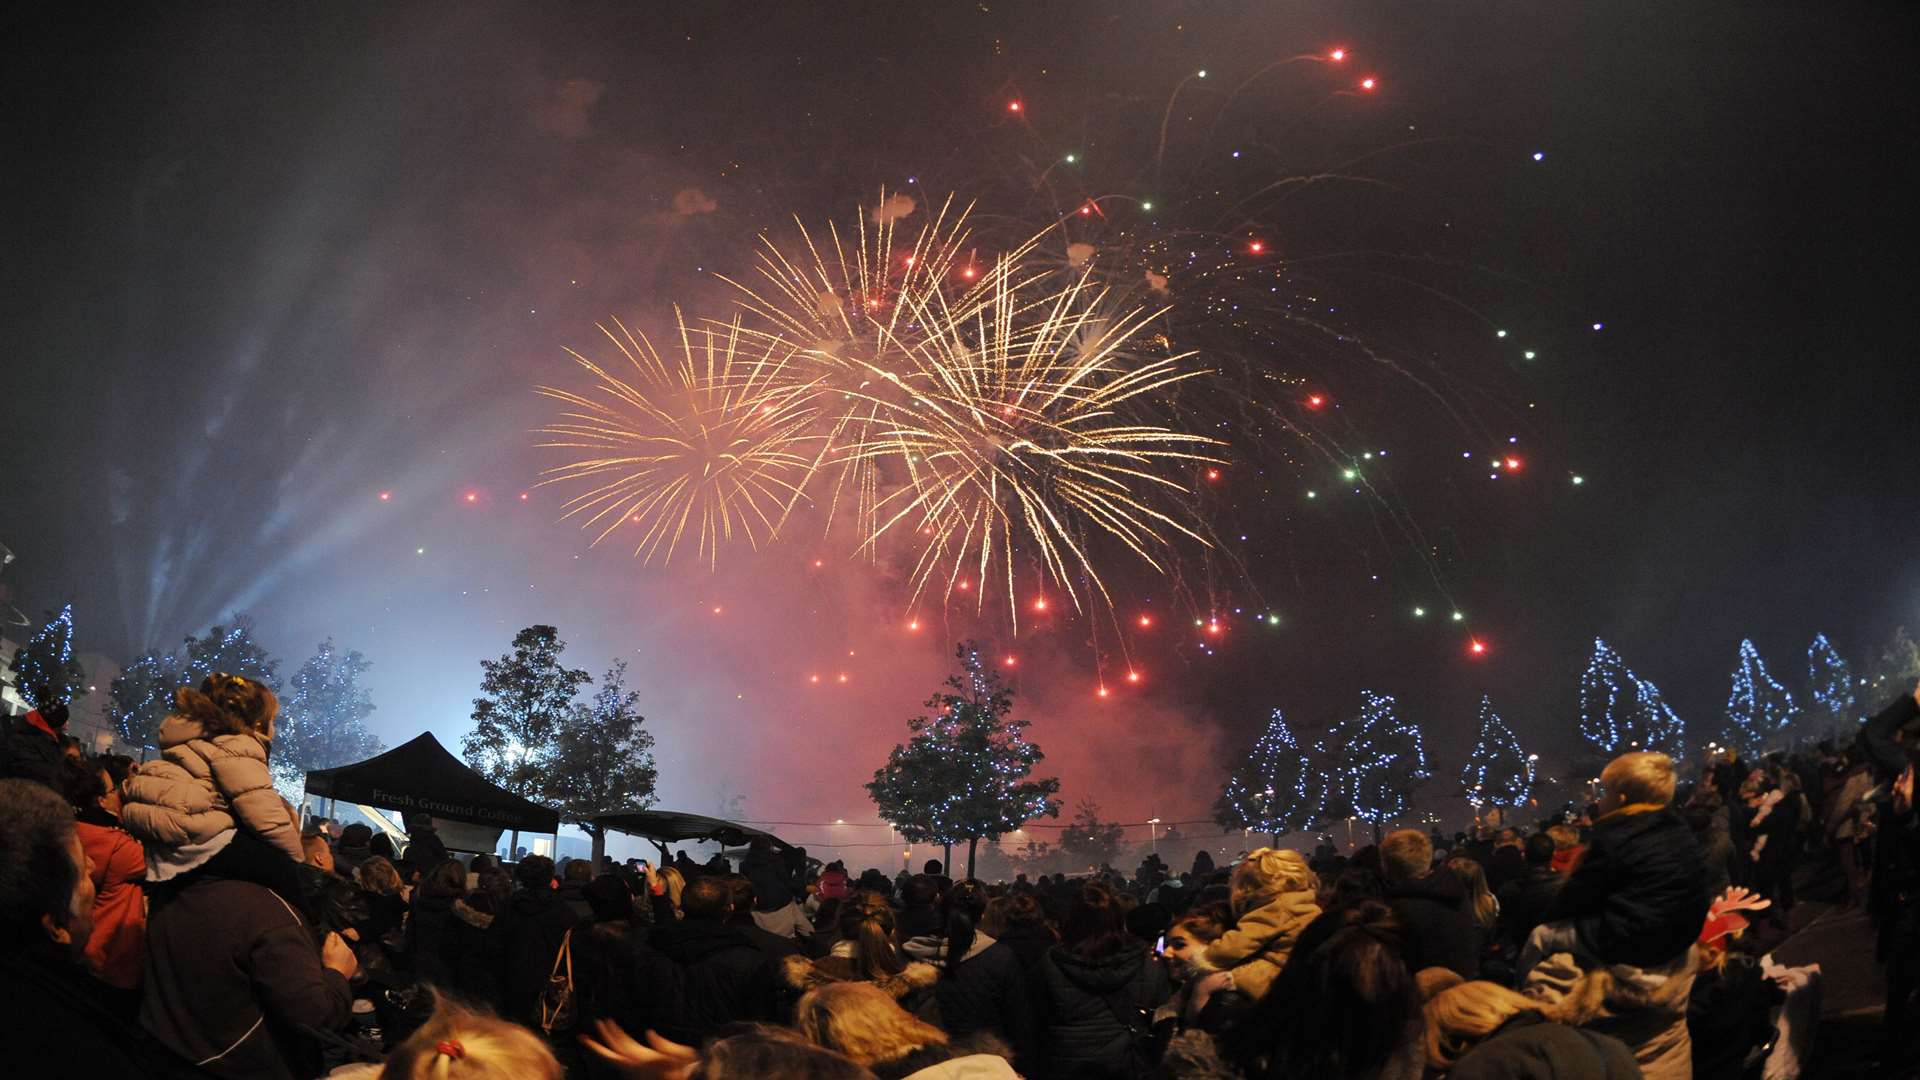 Bluewater's annual fireworks display. Photograph courtesy of: Nick Johnson / The Imageworks